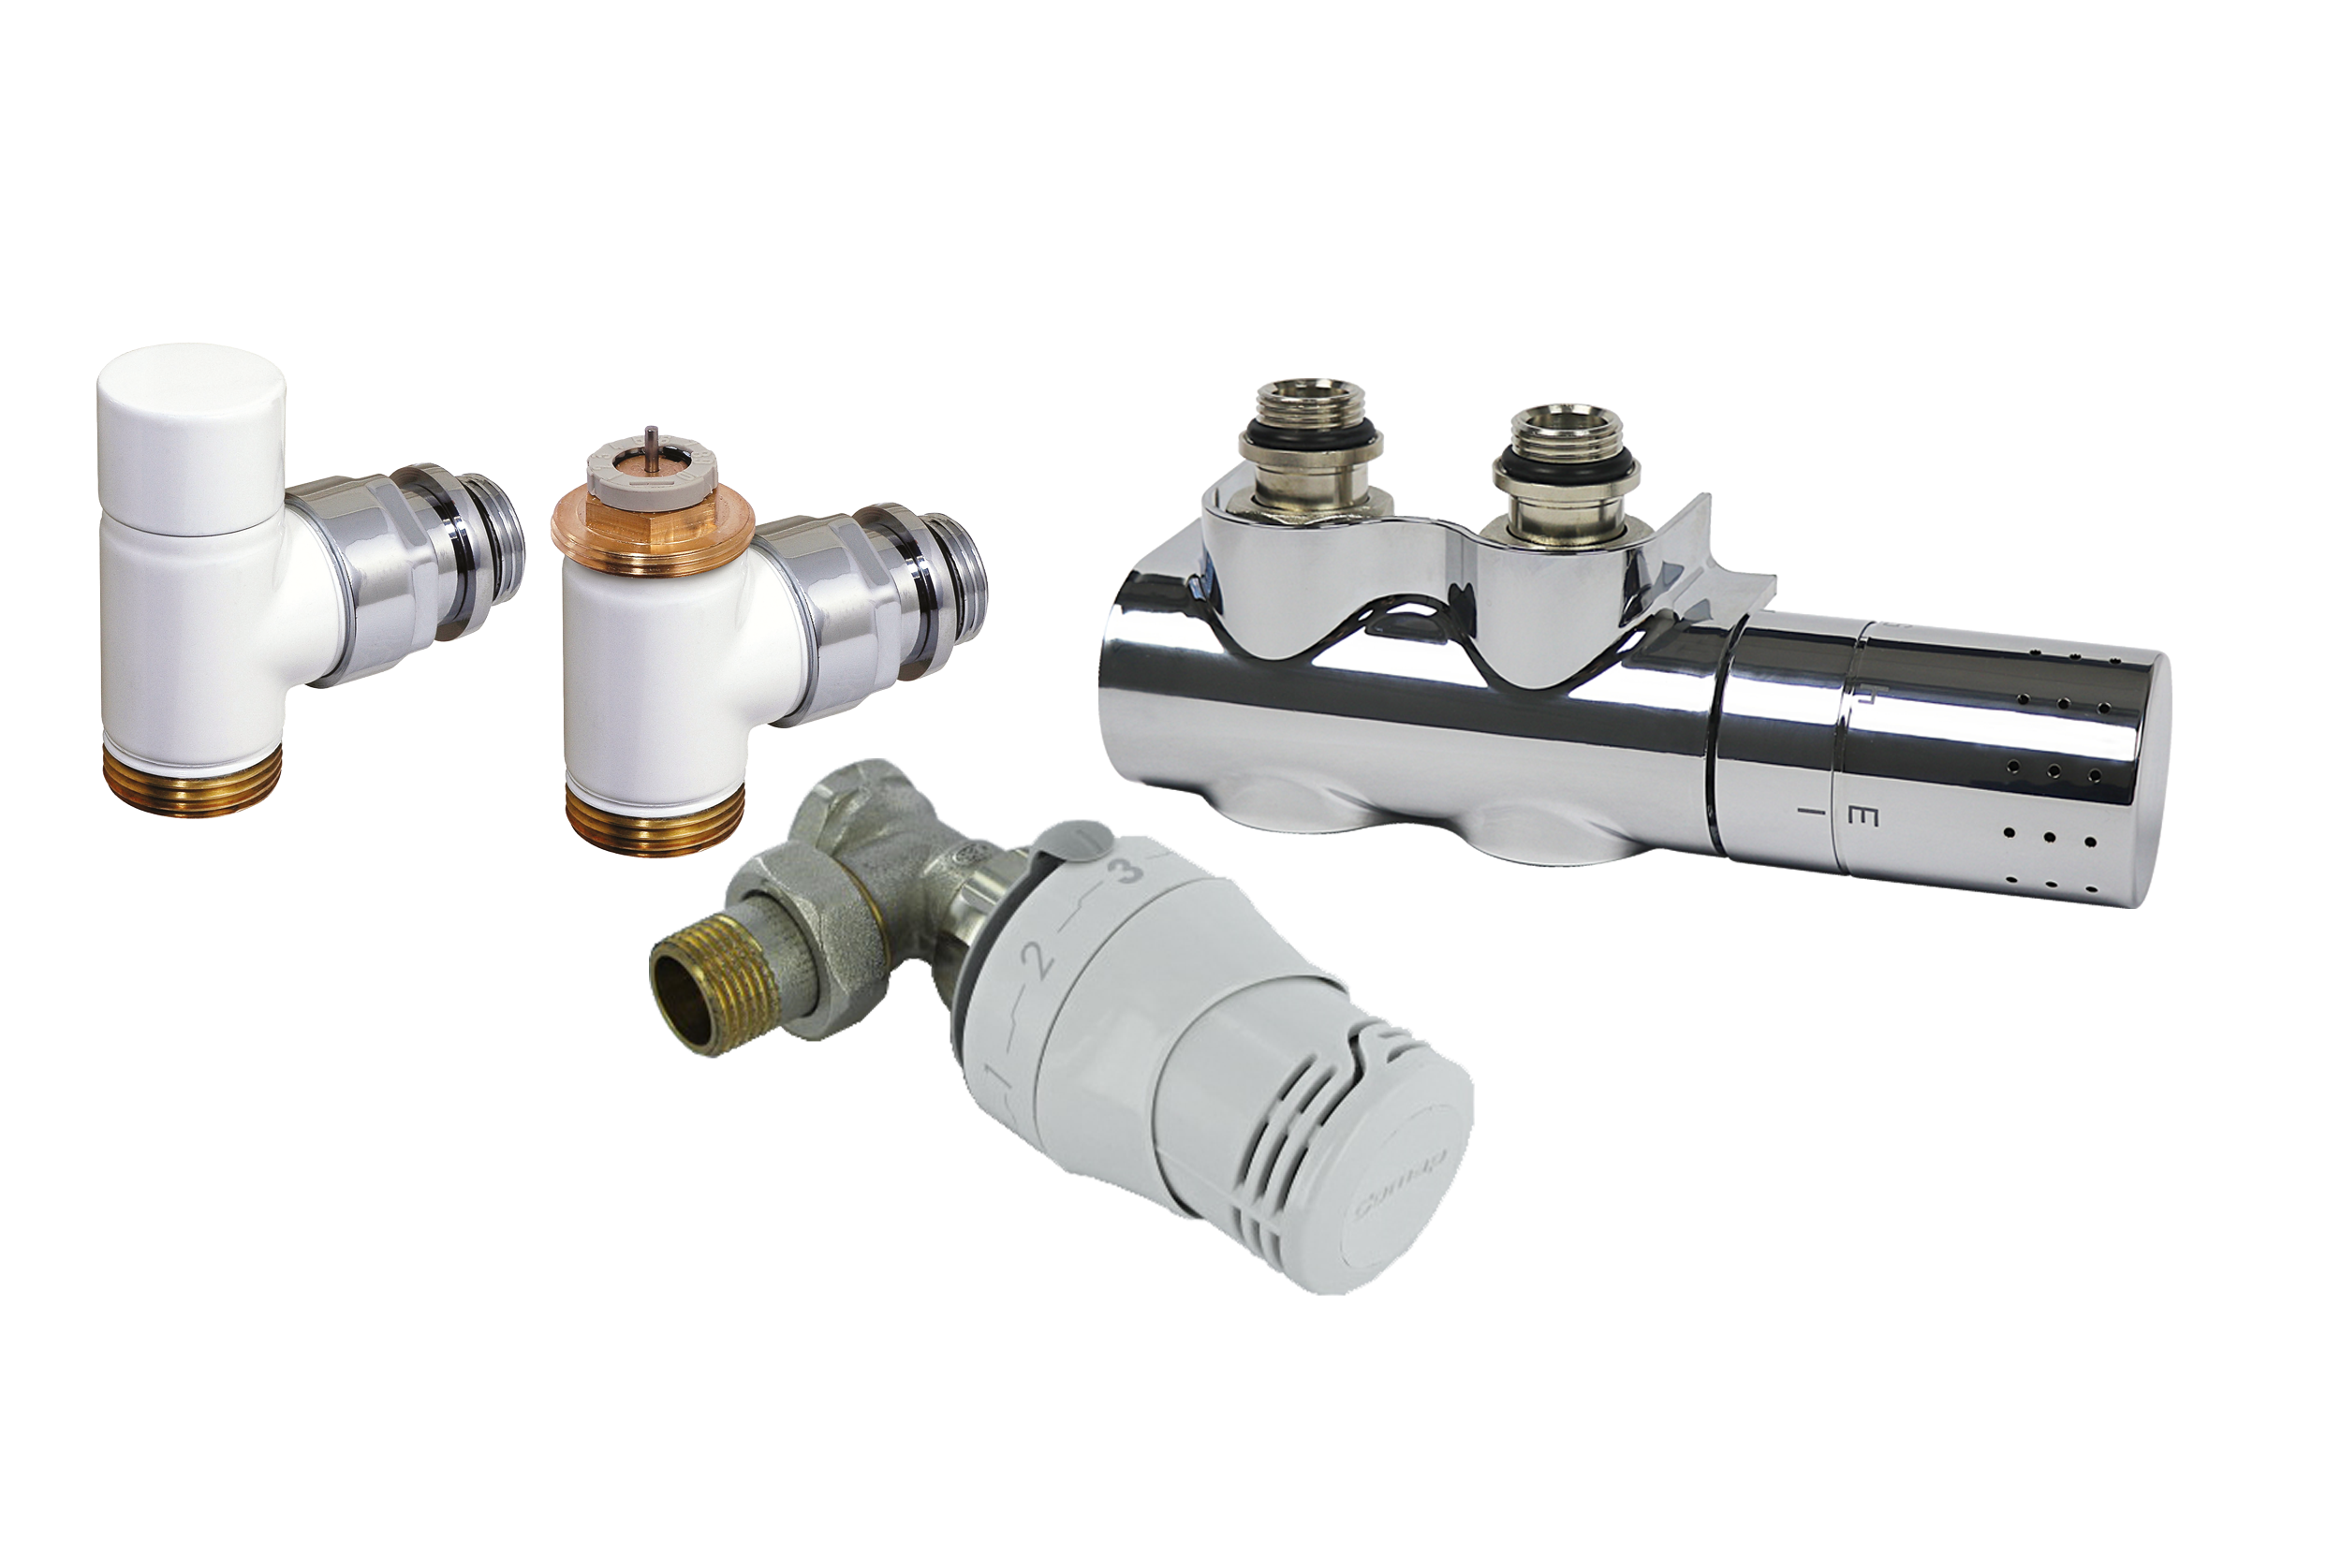 Thermostatic head and valves sets